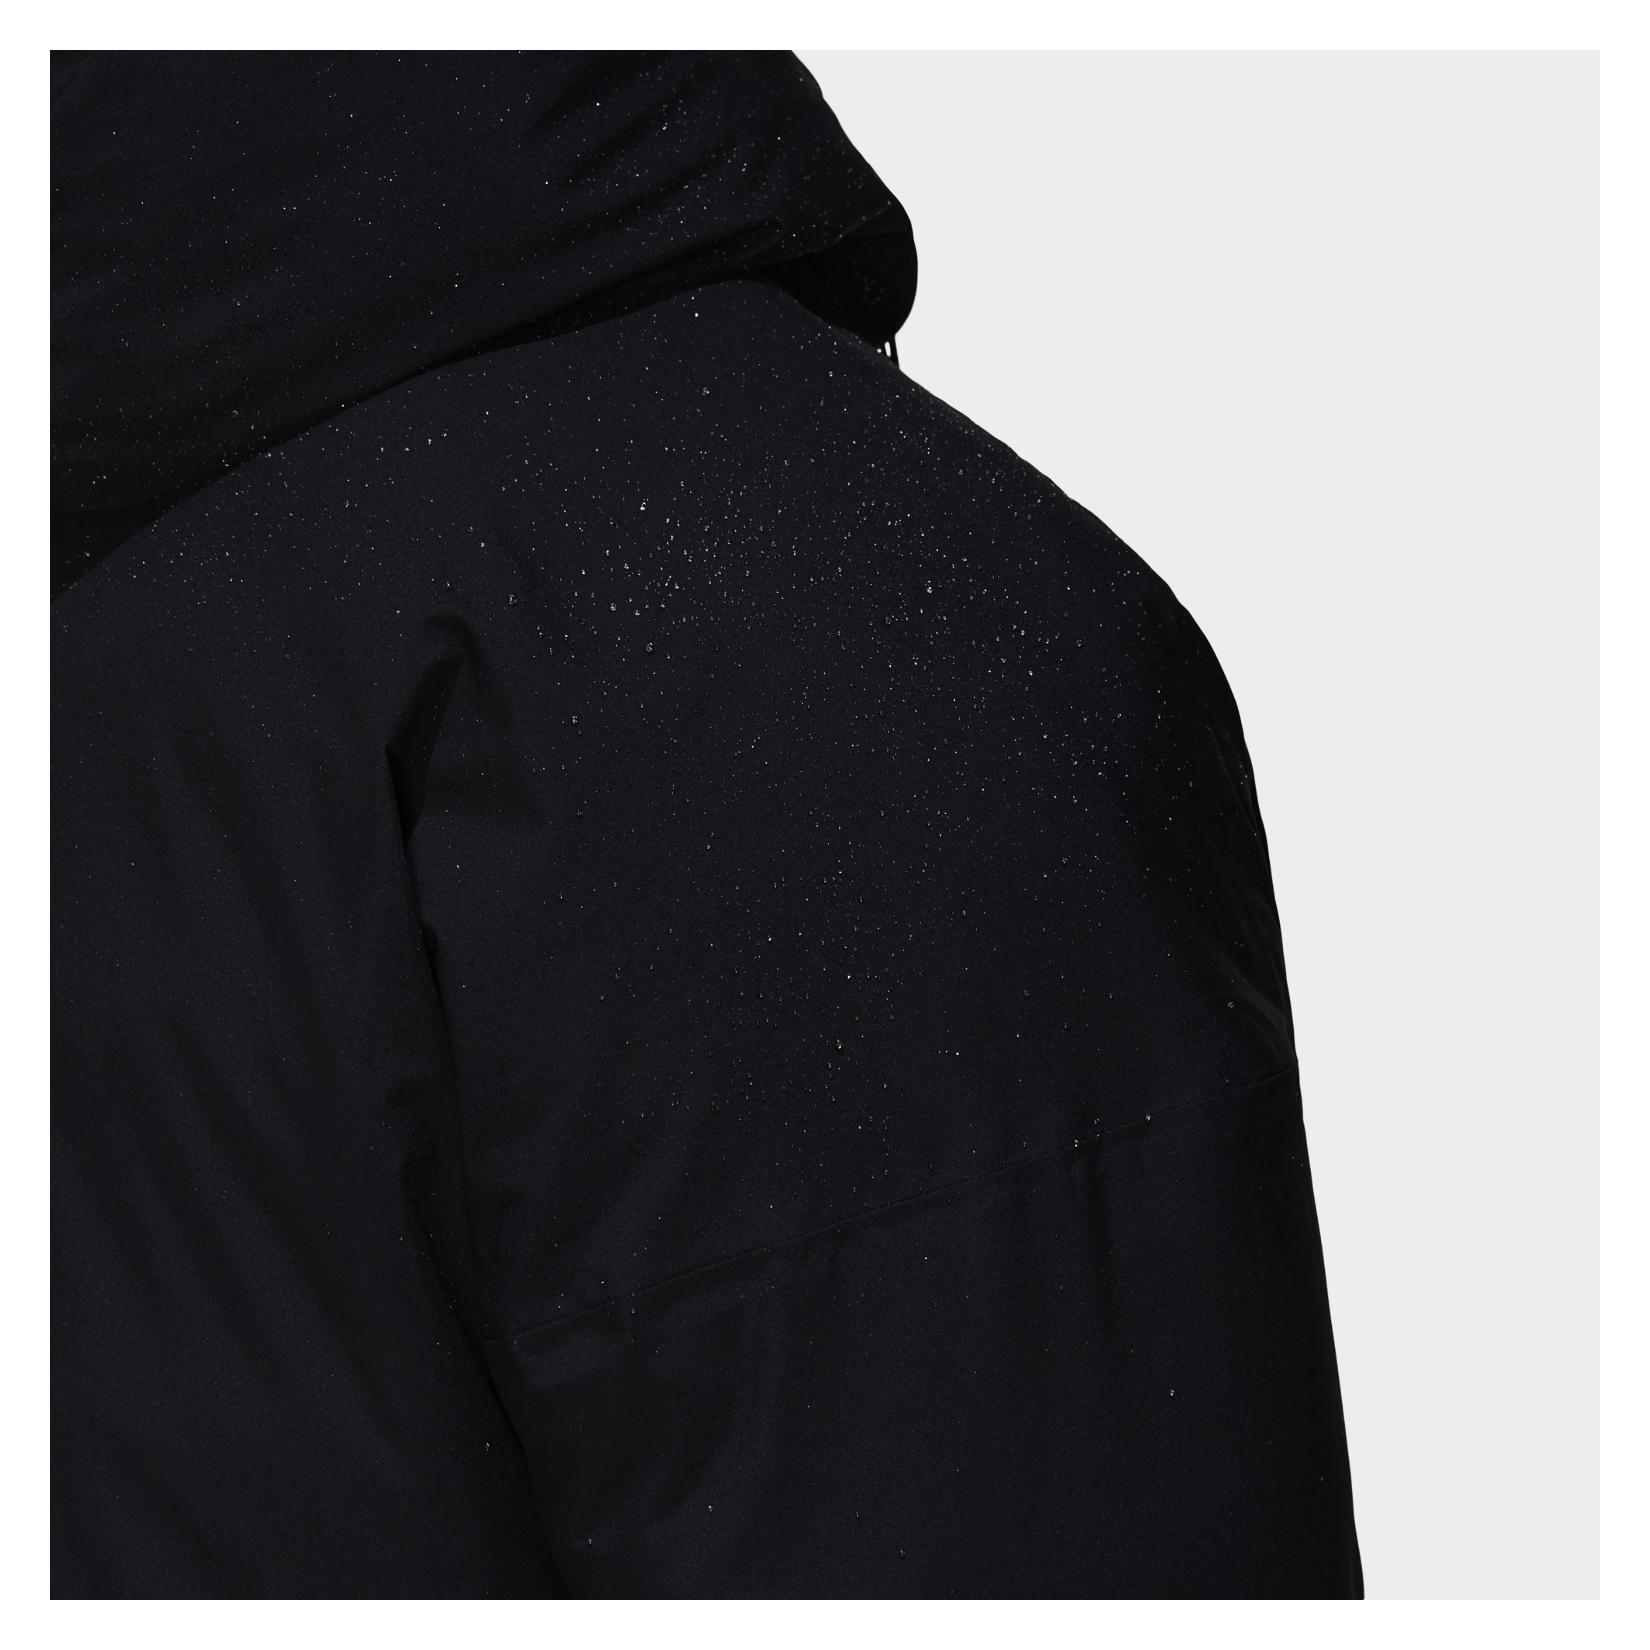 Adidas-LP Outerior Insulated Jacket